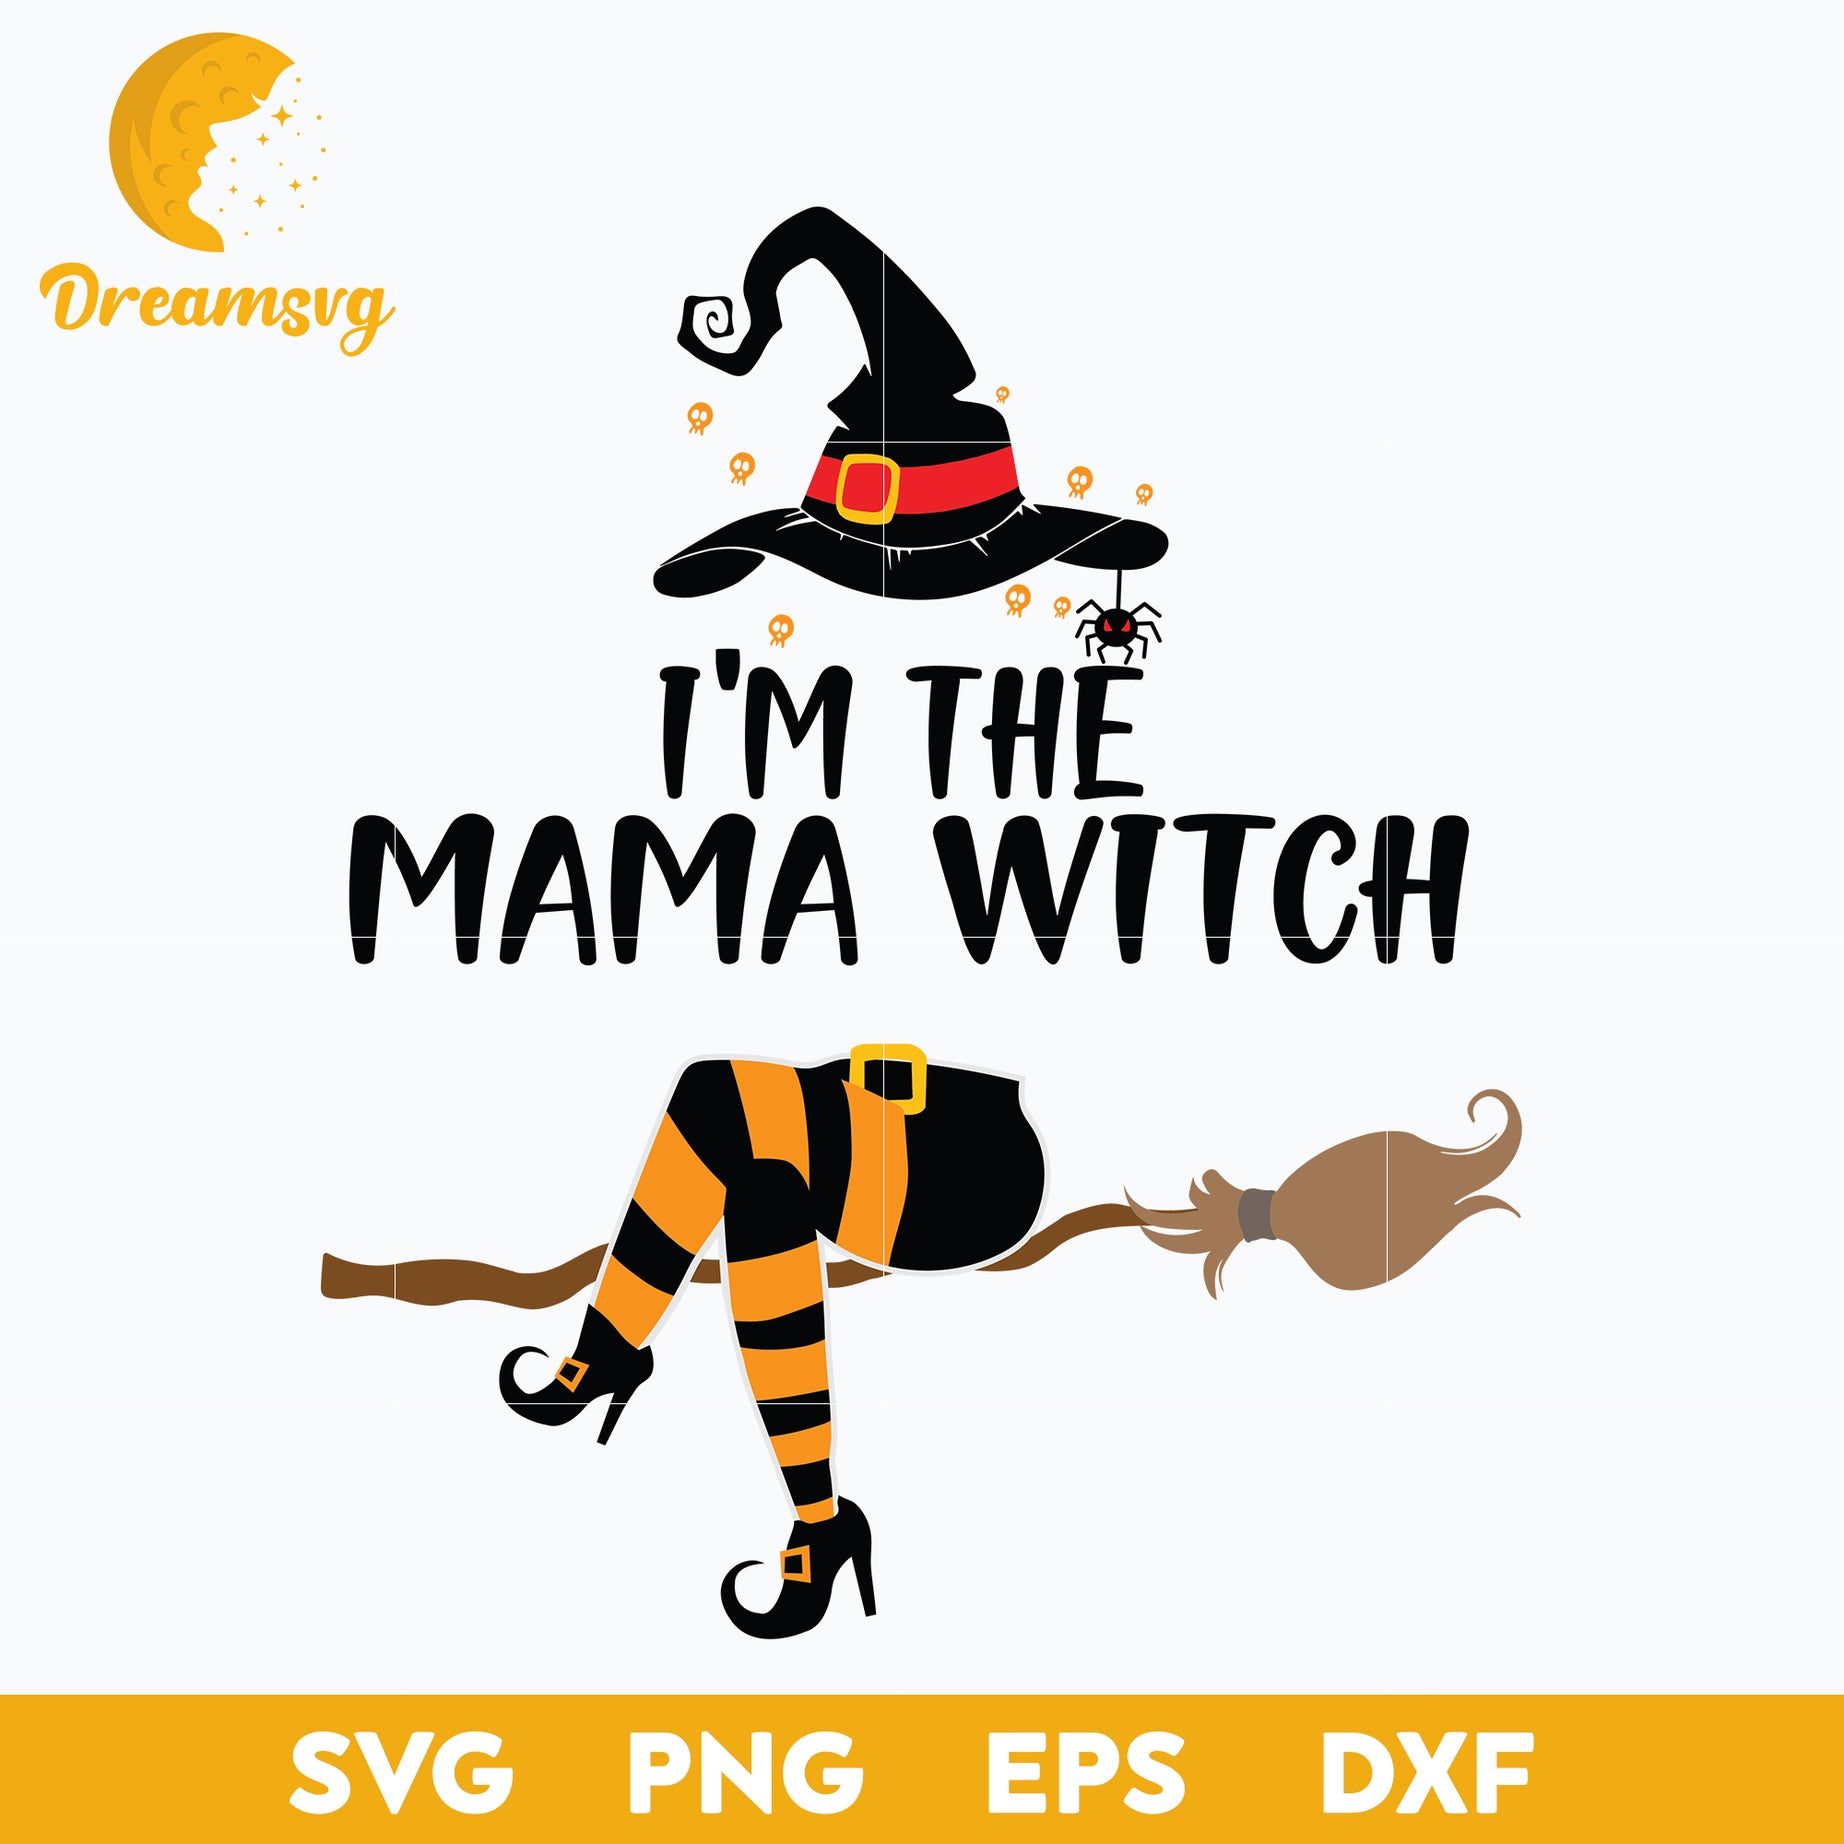 I'm the mama witch svg, Halloween svg, png, dxf, eps digital file.